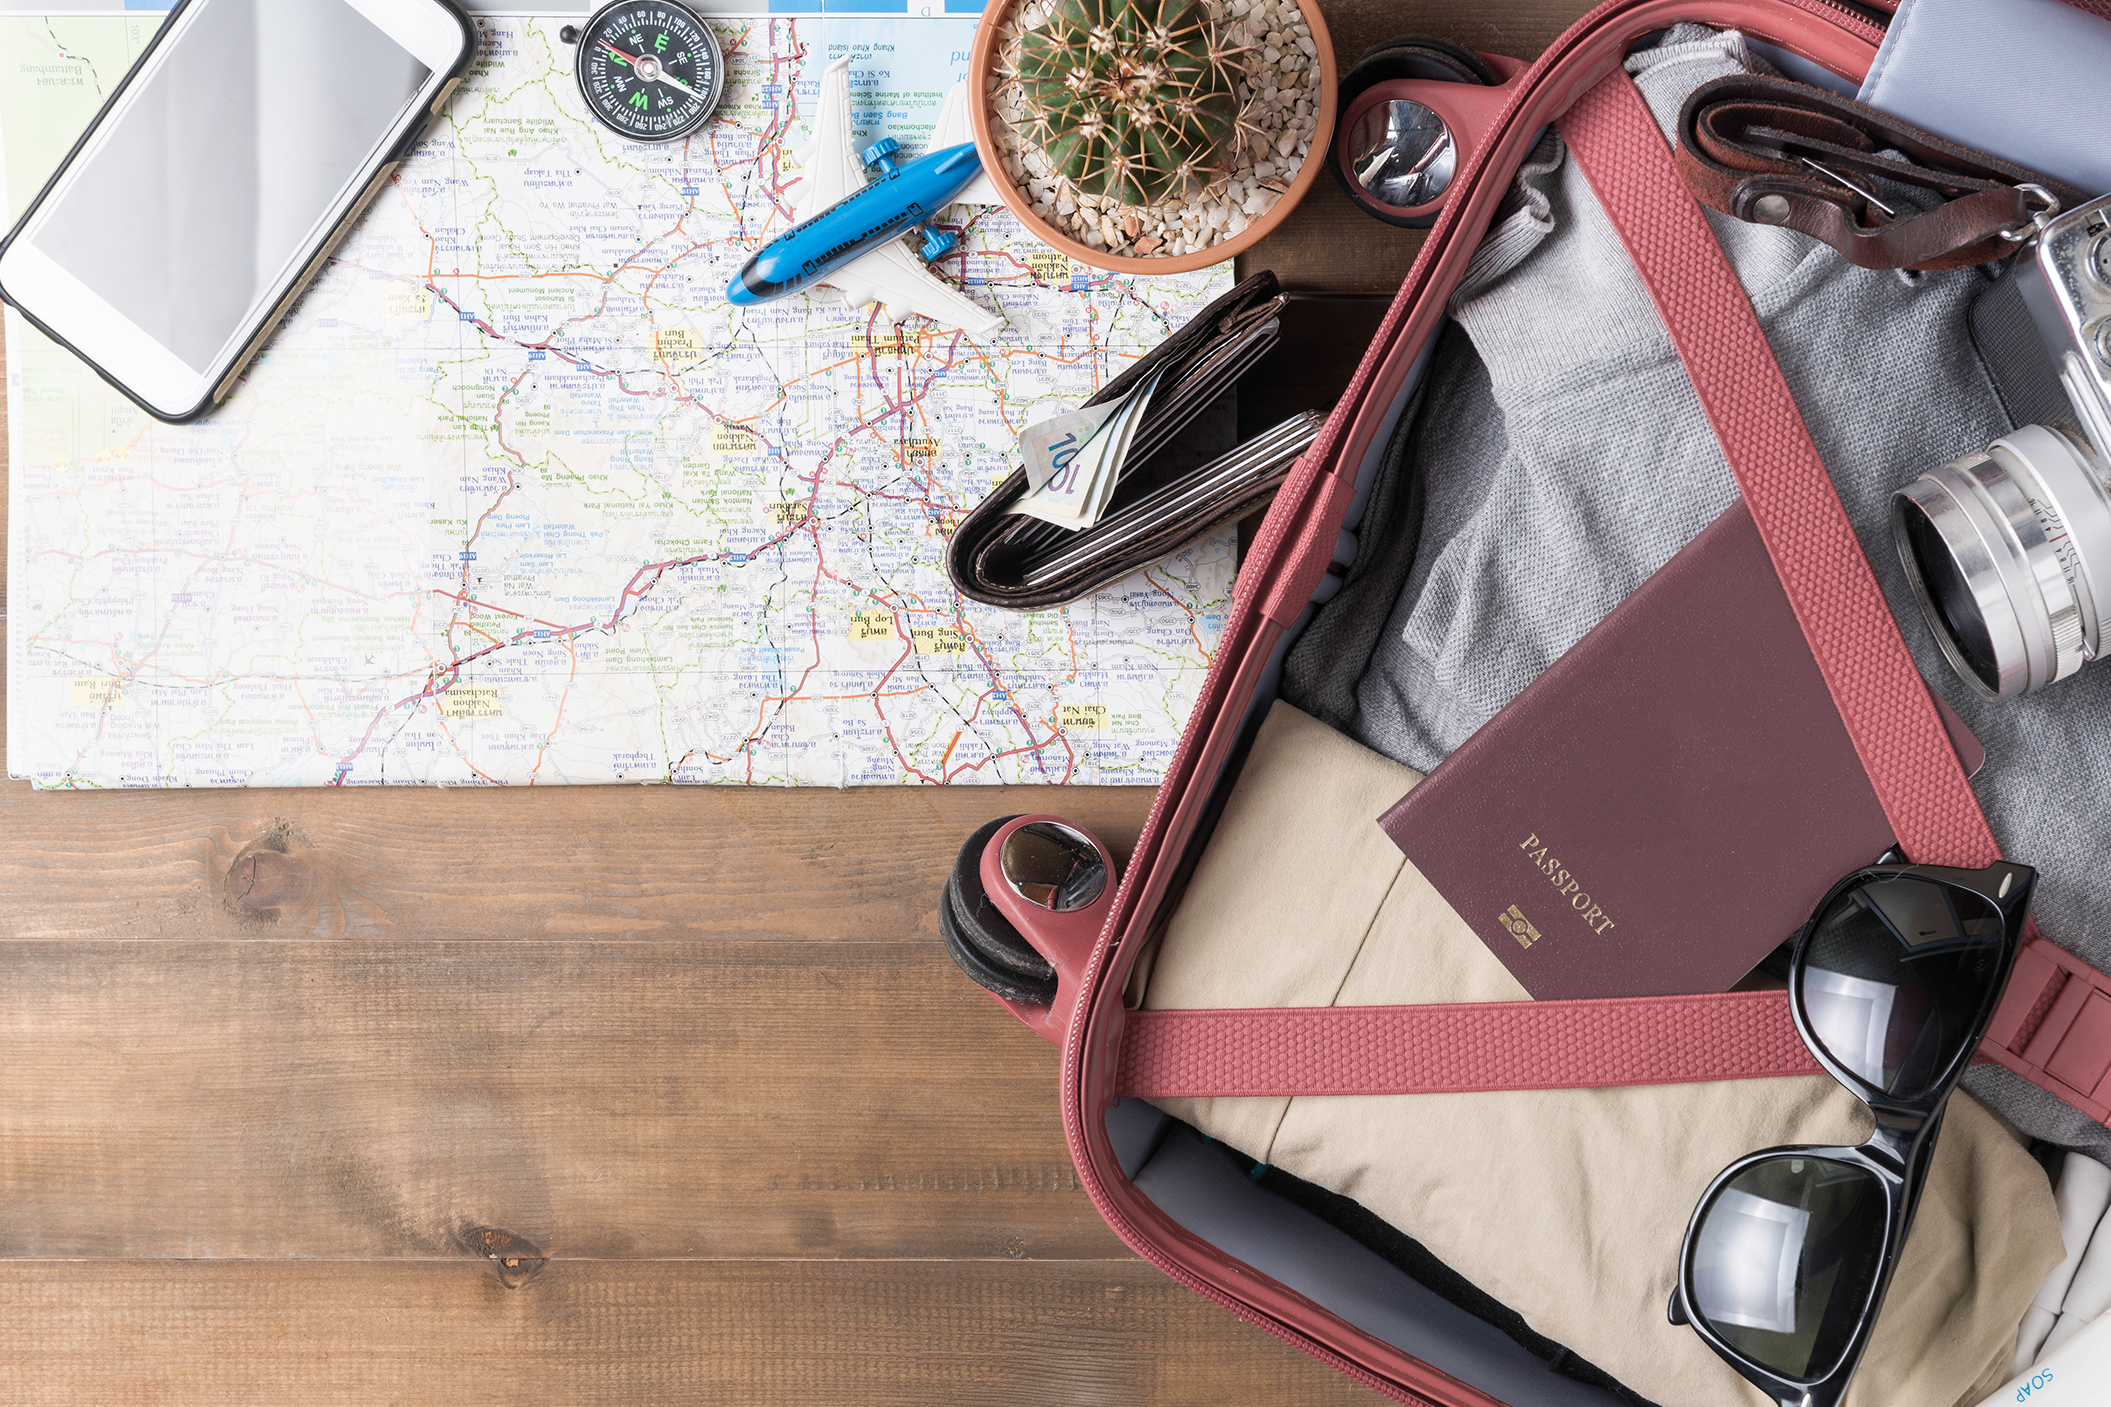 Safe and Secure: Travel Accessories for Personal and Belongings' Safety